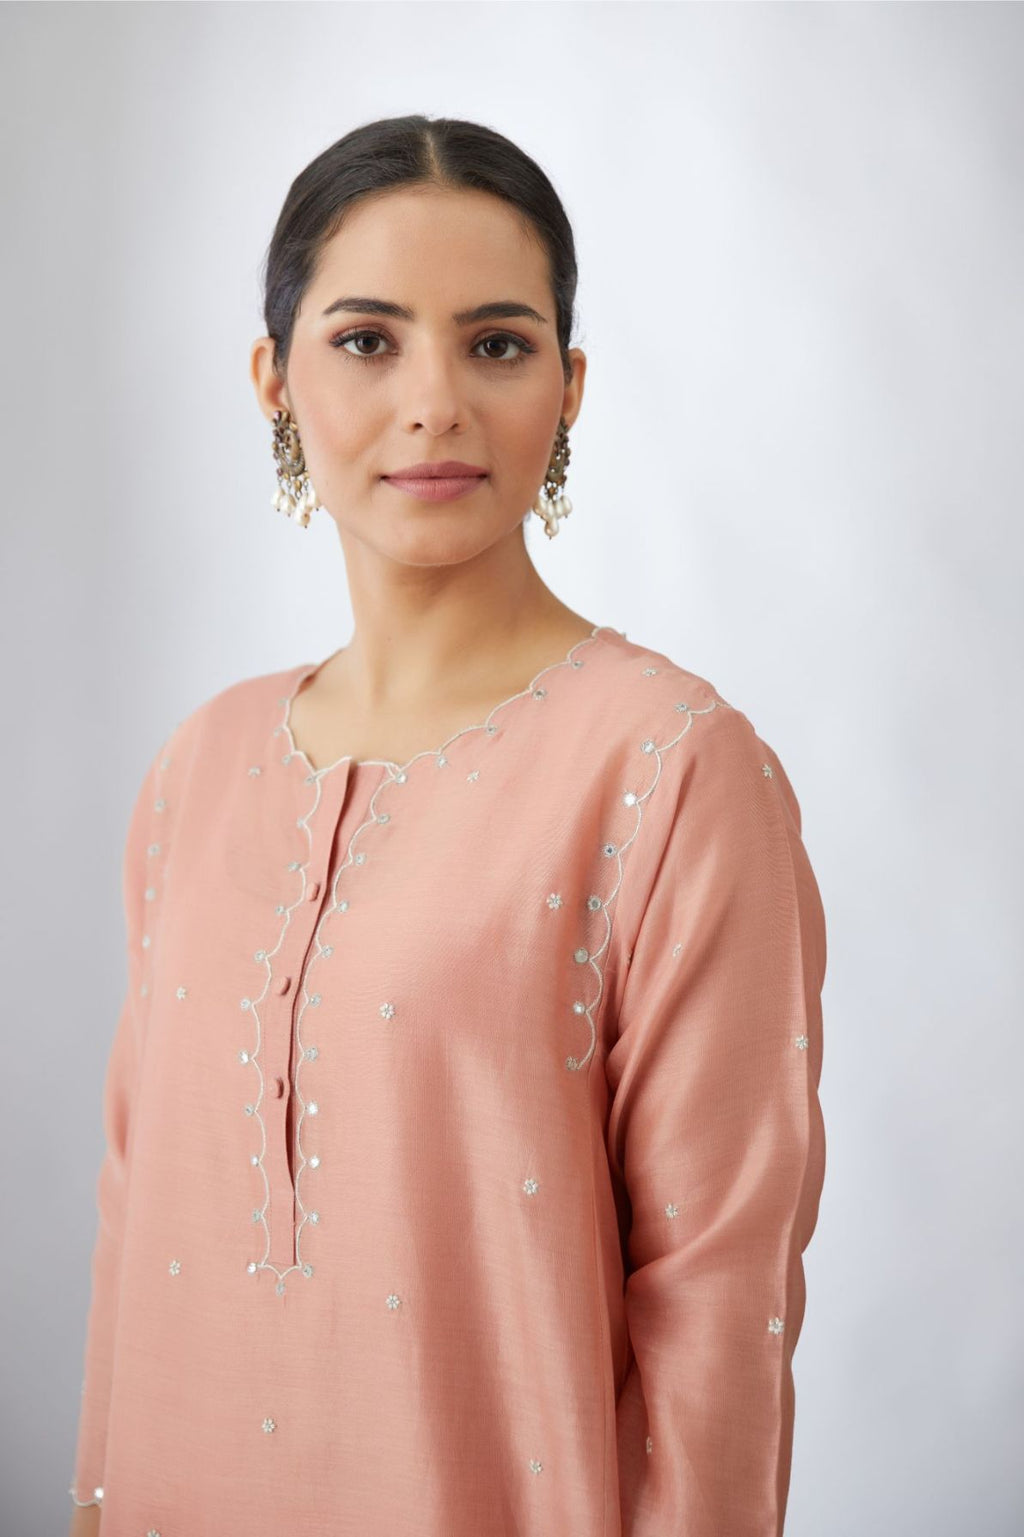 Salmon short kalidar kurta set with all-over delicately embroidered silver zari flowers and scalloped edges, highlighted with mirror hand work.